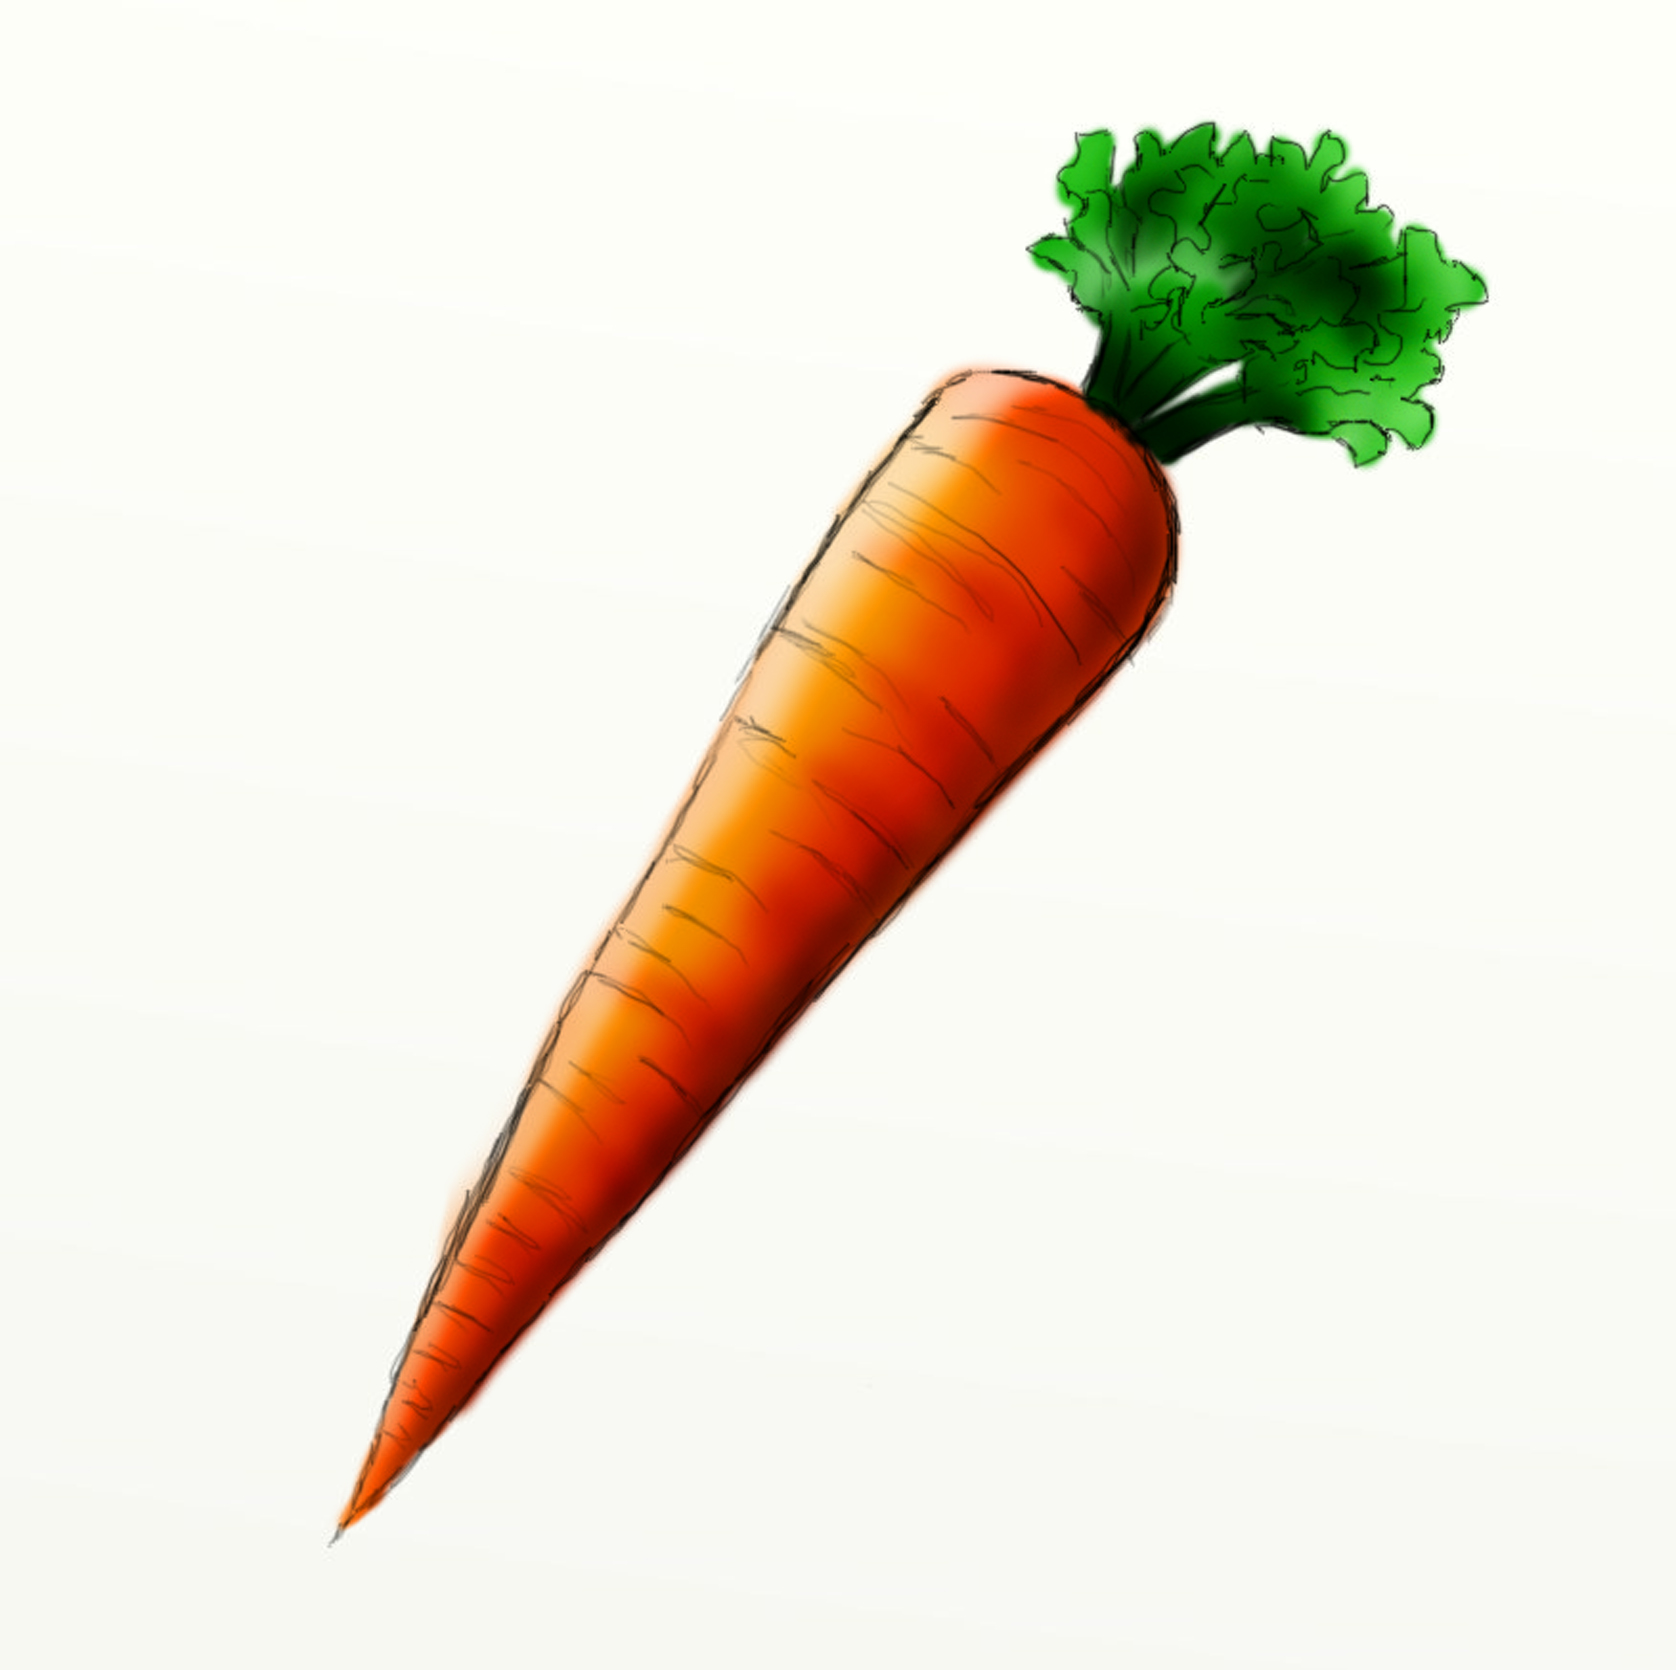 Way To Describe Today  A Carrot  I Drew This Quick Sketch Of A Carrot    